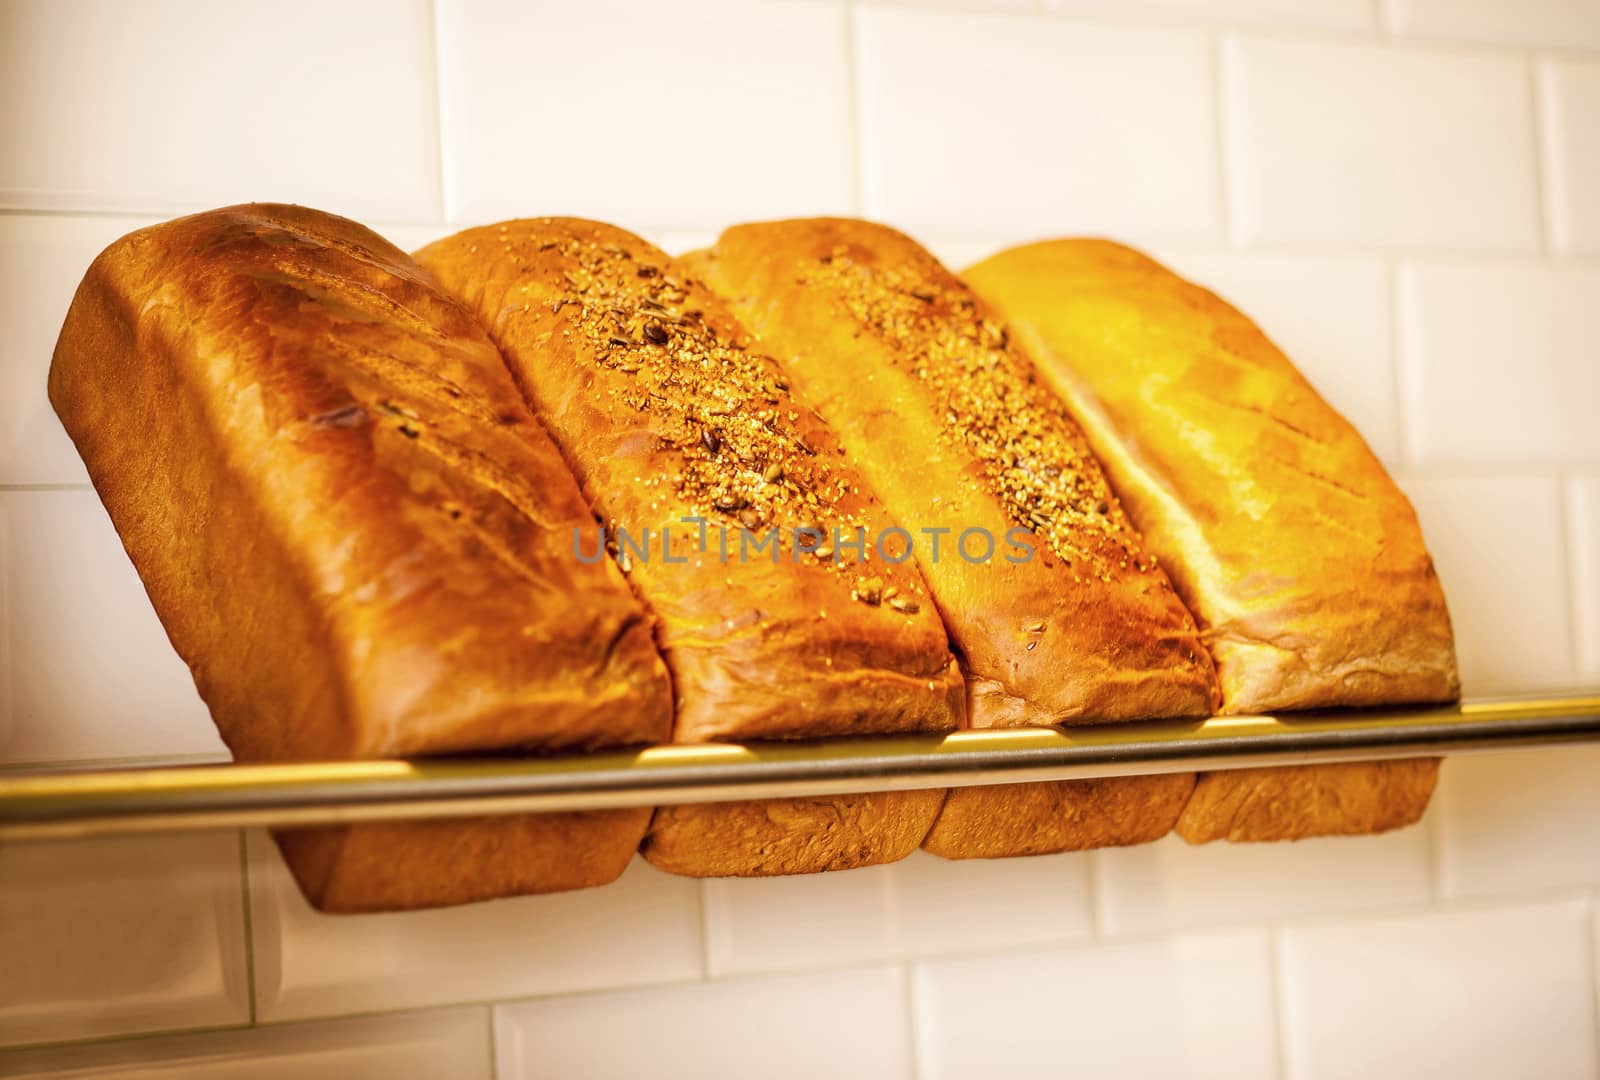 Variety display of loafs of grain and white breads